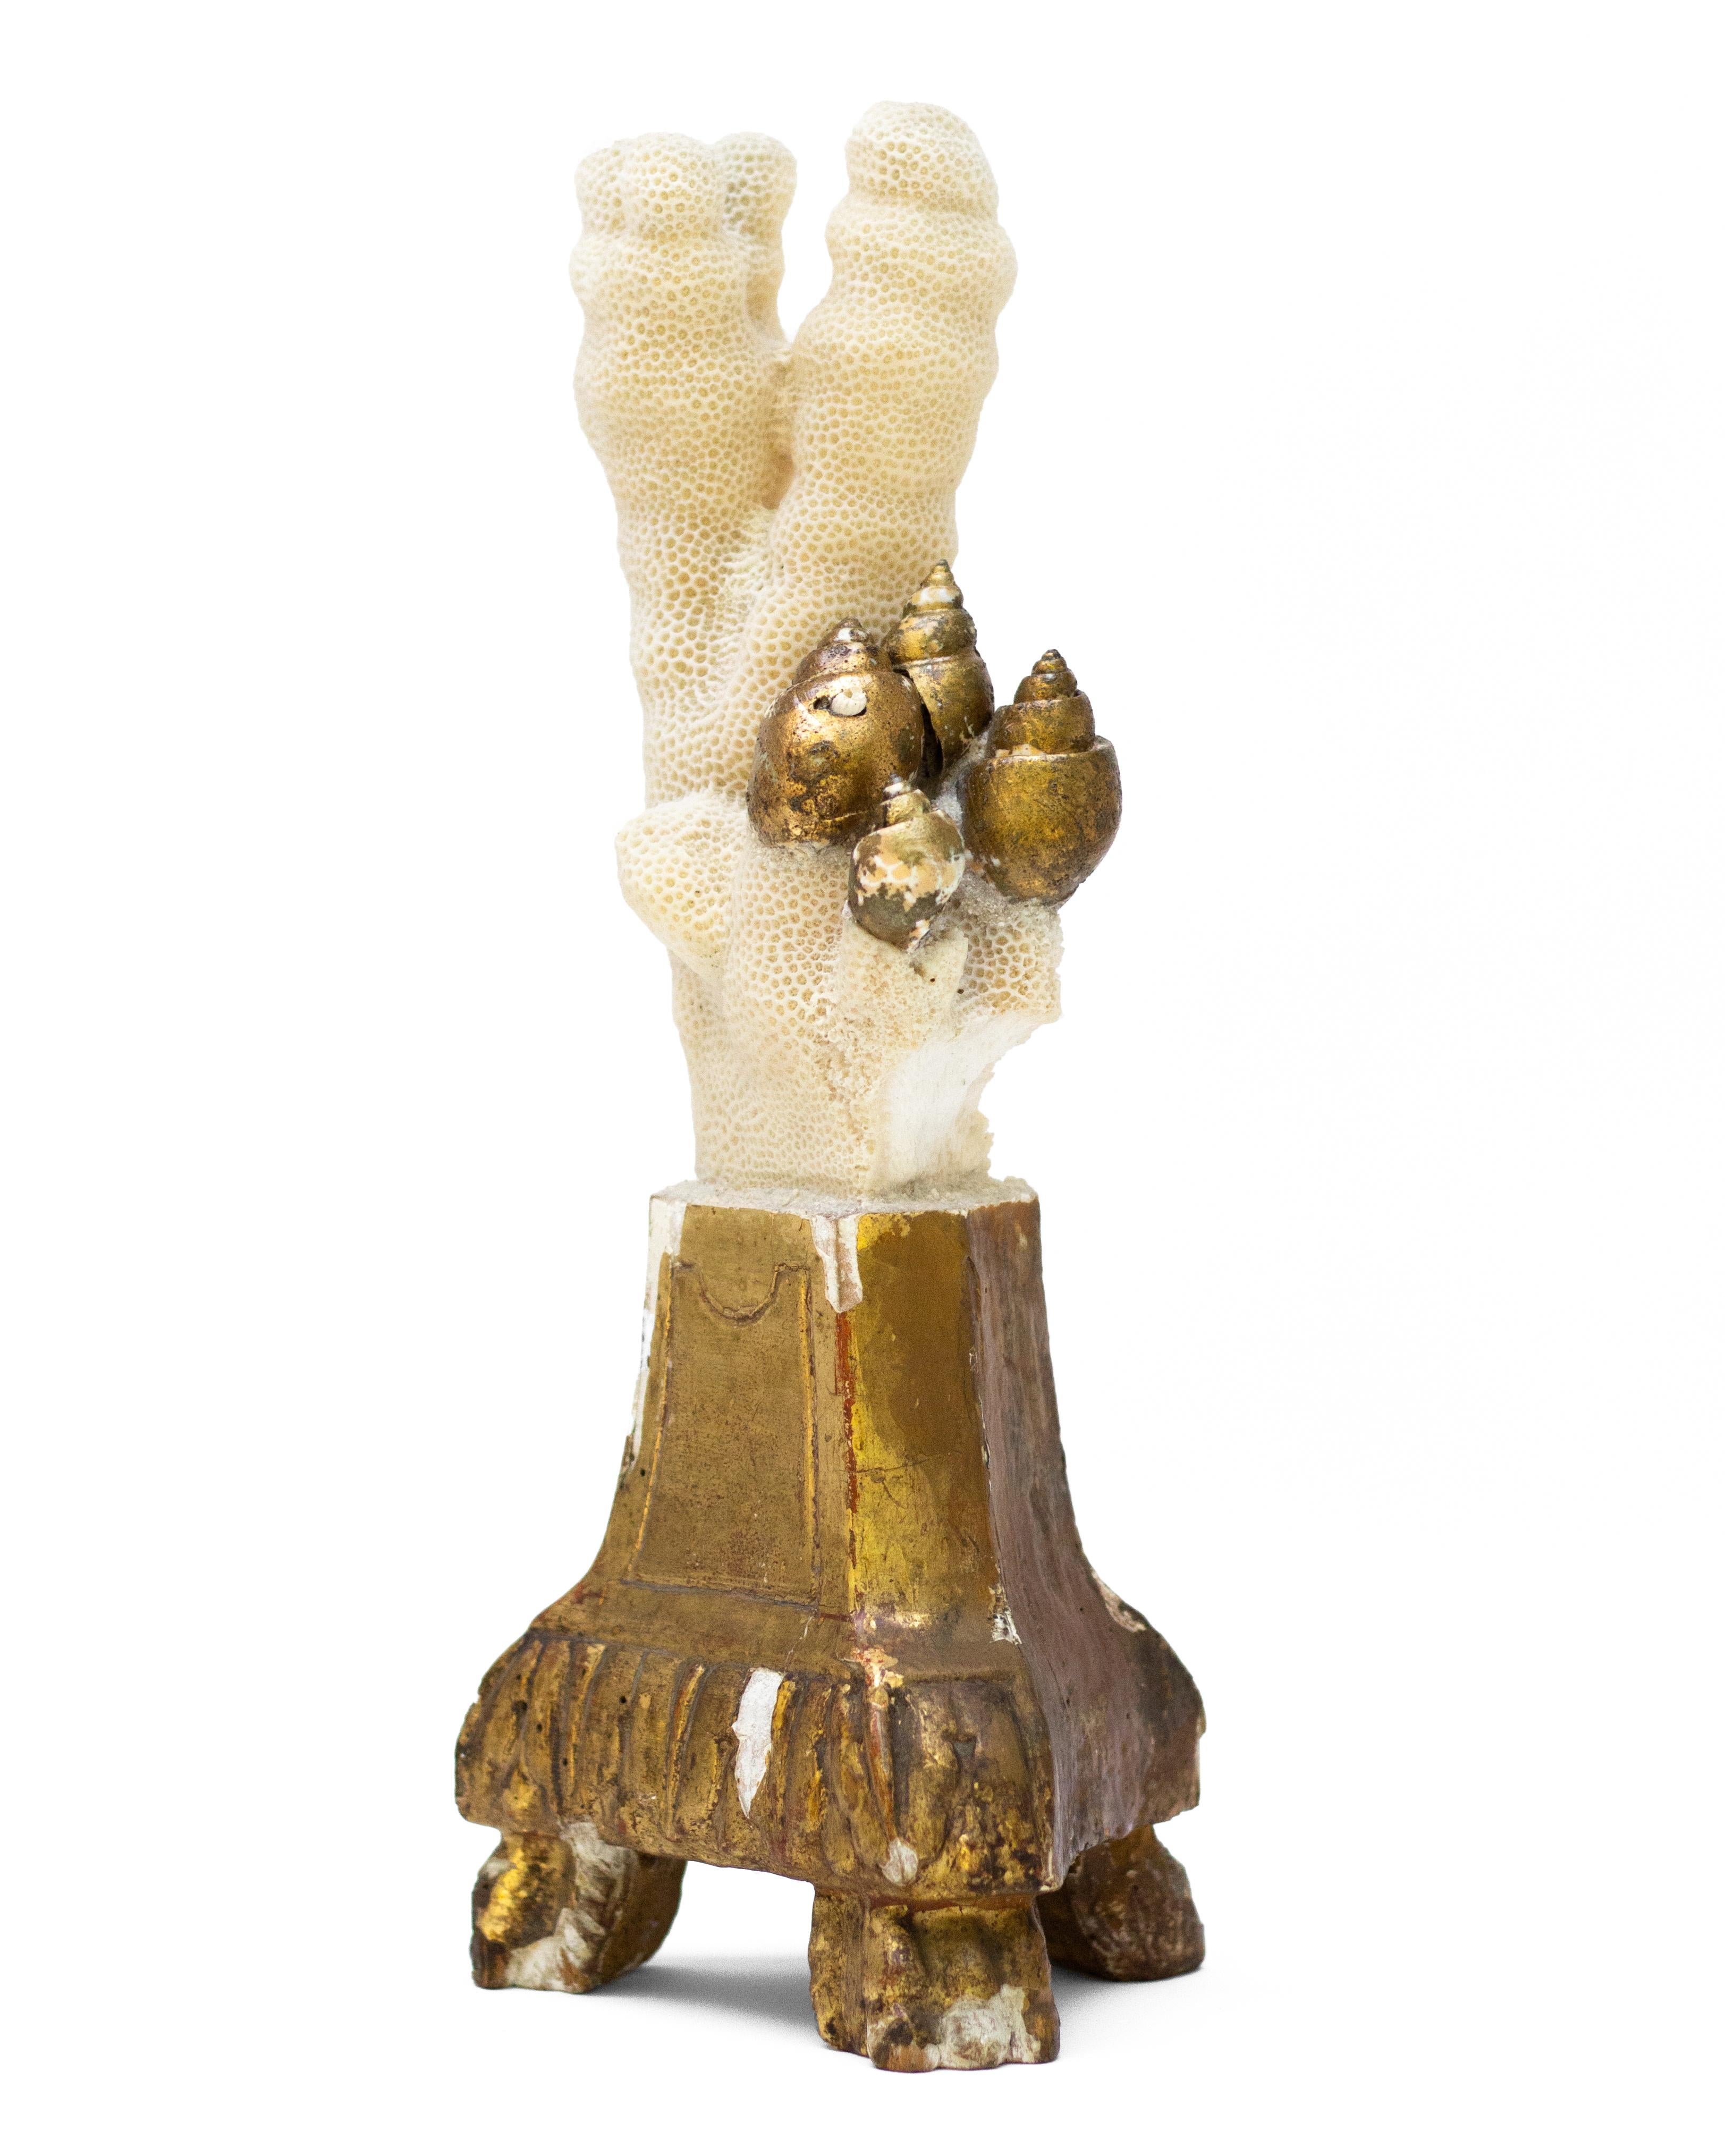 18th century Italian candlestick base decorated with fossil coral and coordinating gold leaf shells.